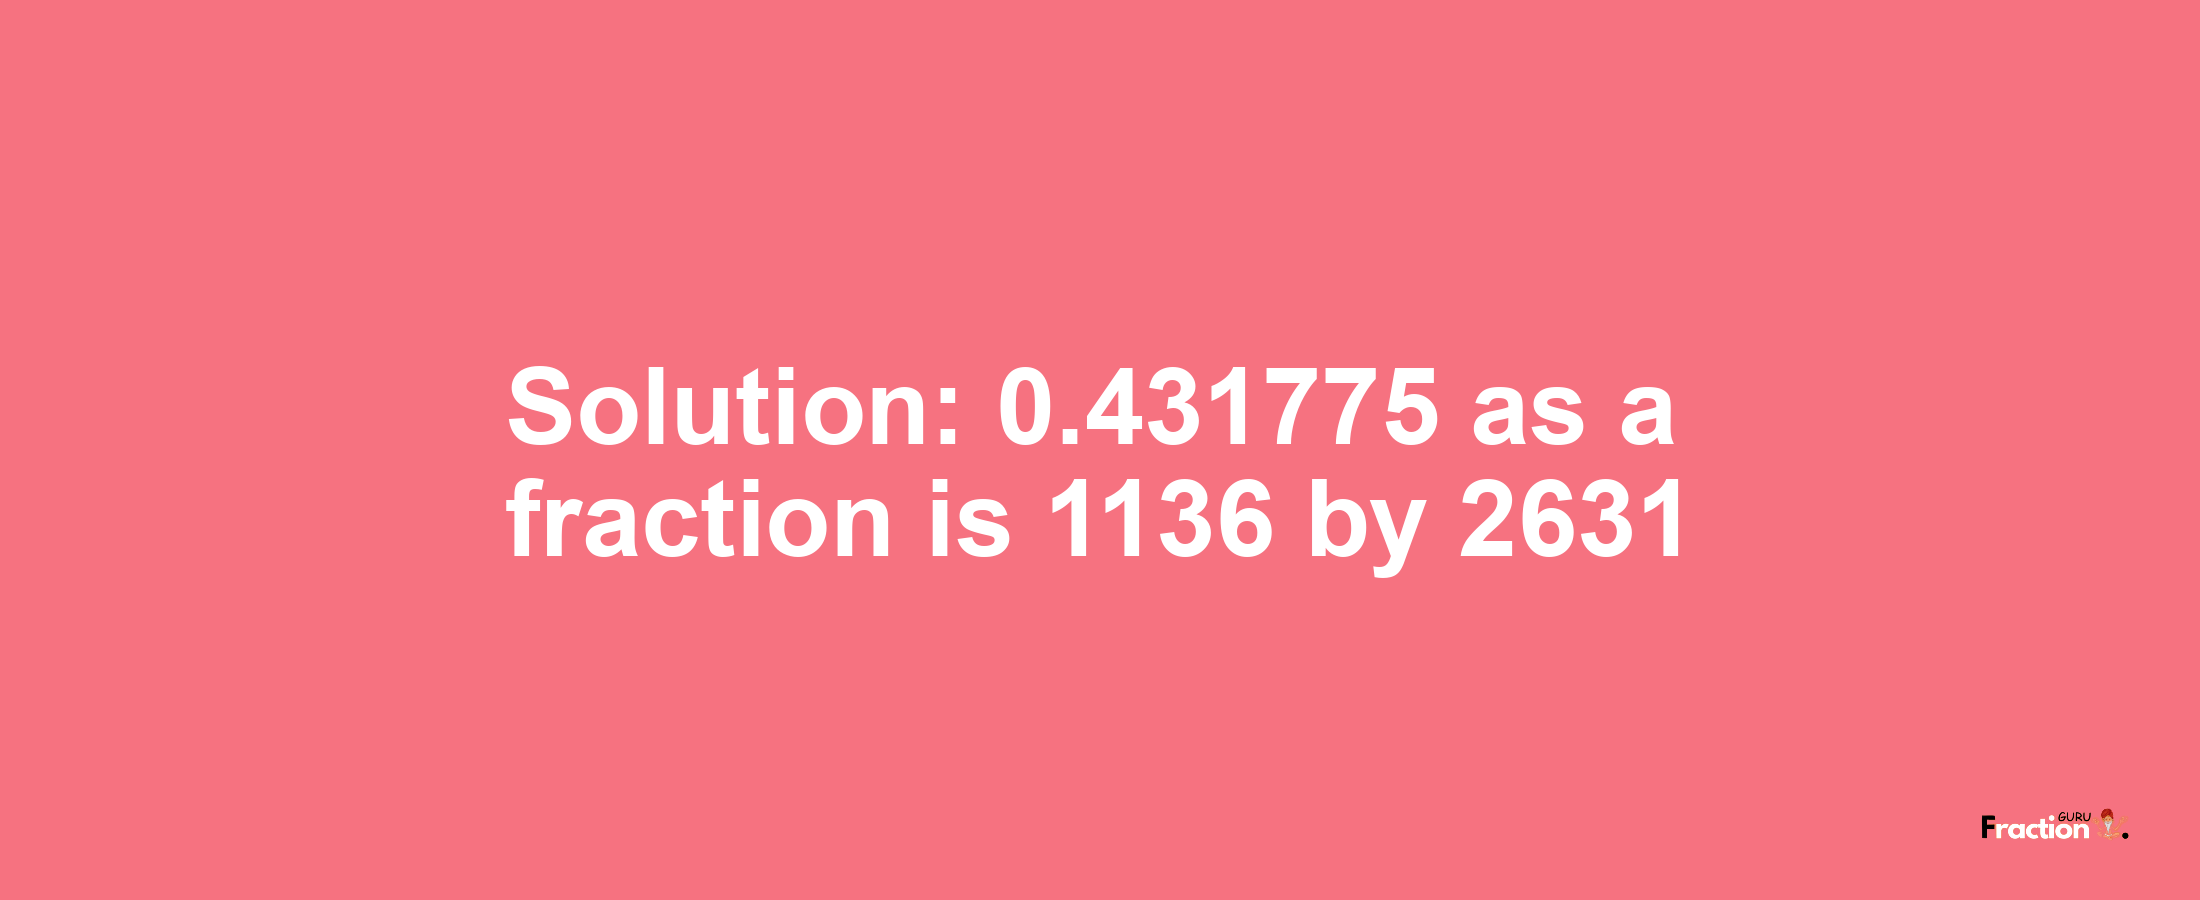 Solution:0.431775 as a fraction is 1136/2631